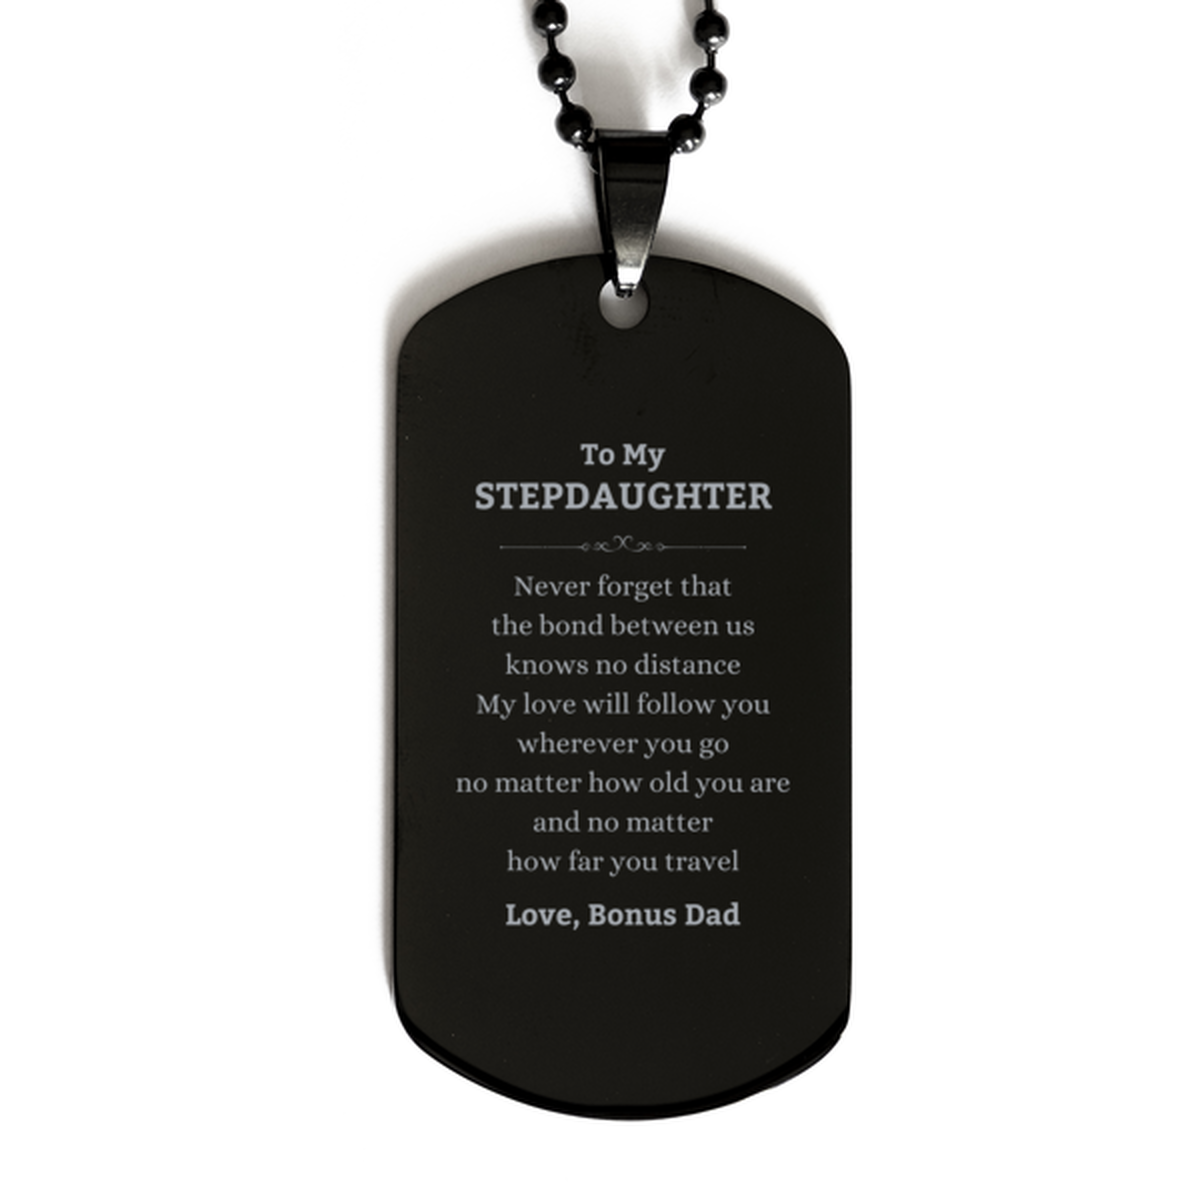 Stepdaughter Birthday Gifts from Bonus Dad, Adjustable Black Dog Tag for Stepdaughter Christmas Graduation Unique Gifts Stepdaughter Never forget that the bond between us knows no distance. Love, Bonus Dad